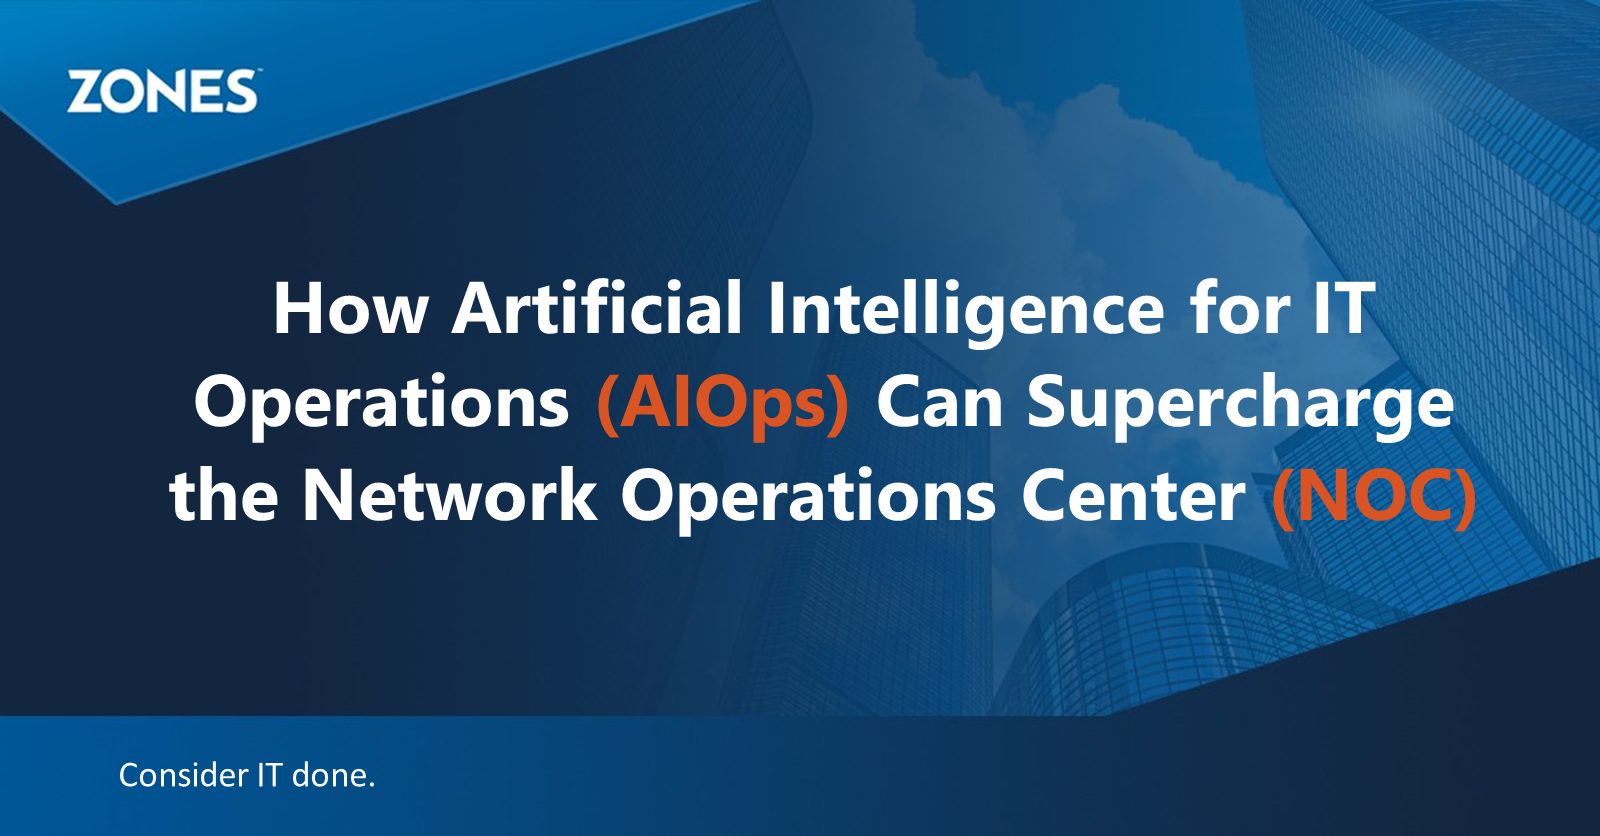 How Artificial Intelligence for IT Operations (AIOps) Can Supercharge the Network Operations Center (NOC)